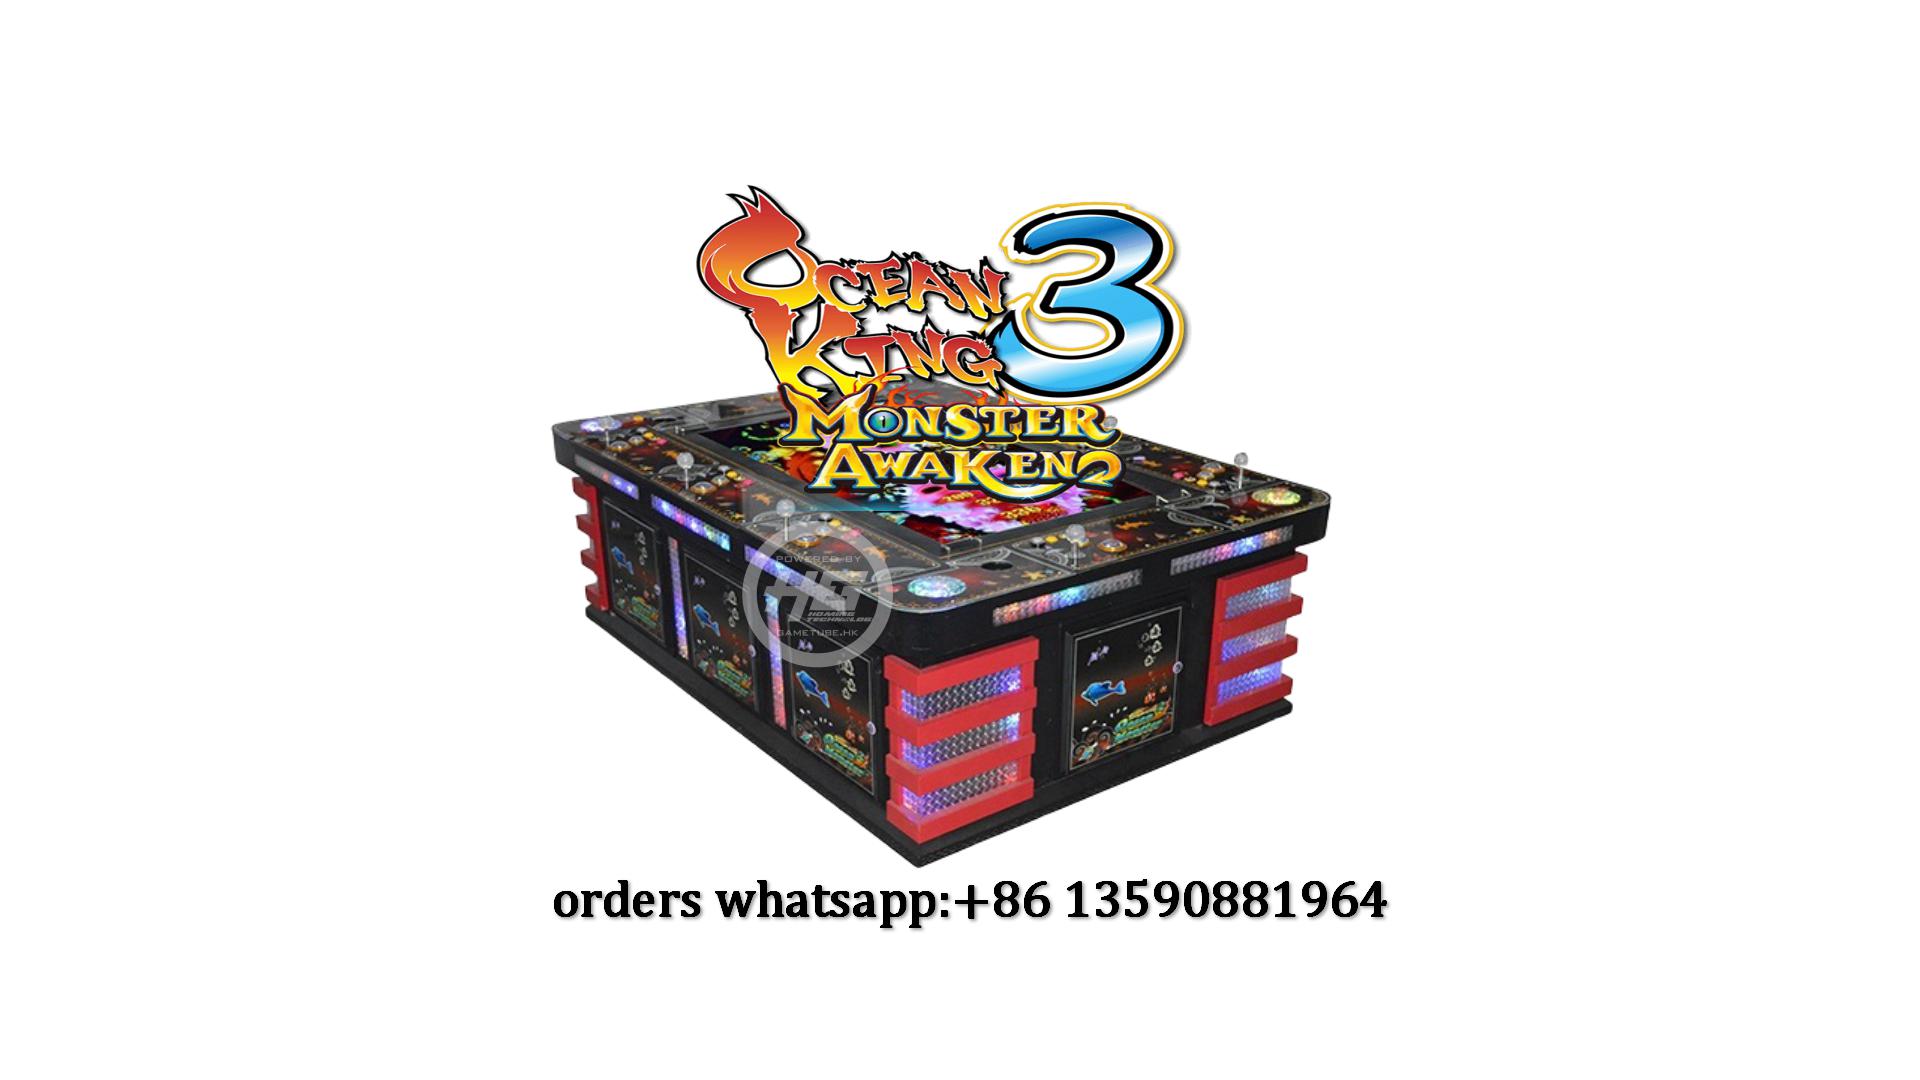 IGS Original Fishing Game,Ocean King 3 Plus,Fish Table Game For Sale,Adult Arcade Game Room,Fish Arcade Game Room